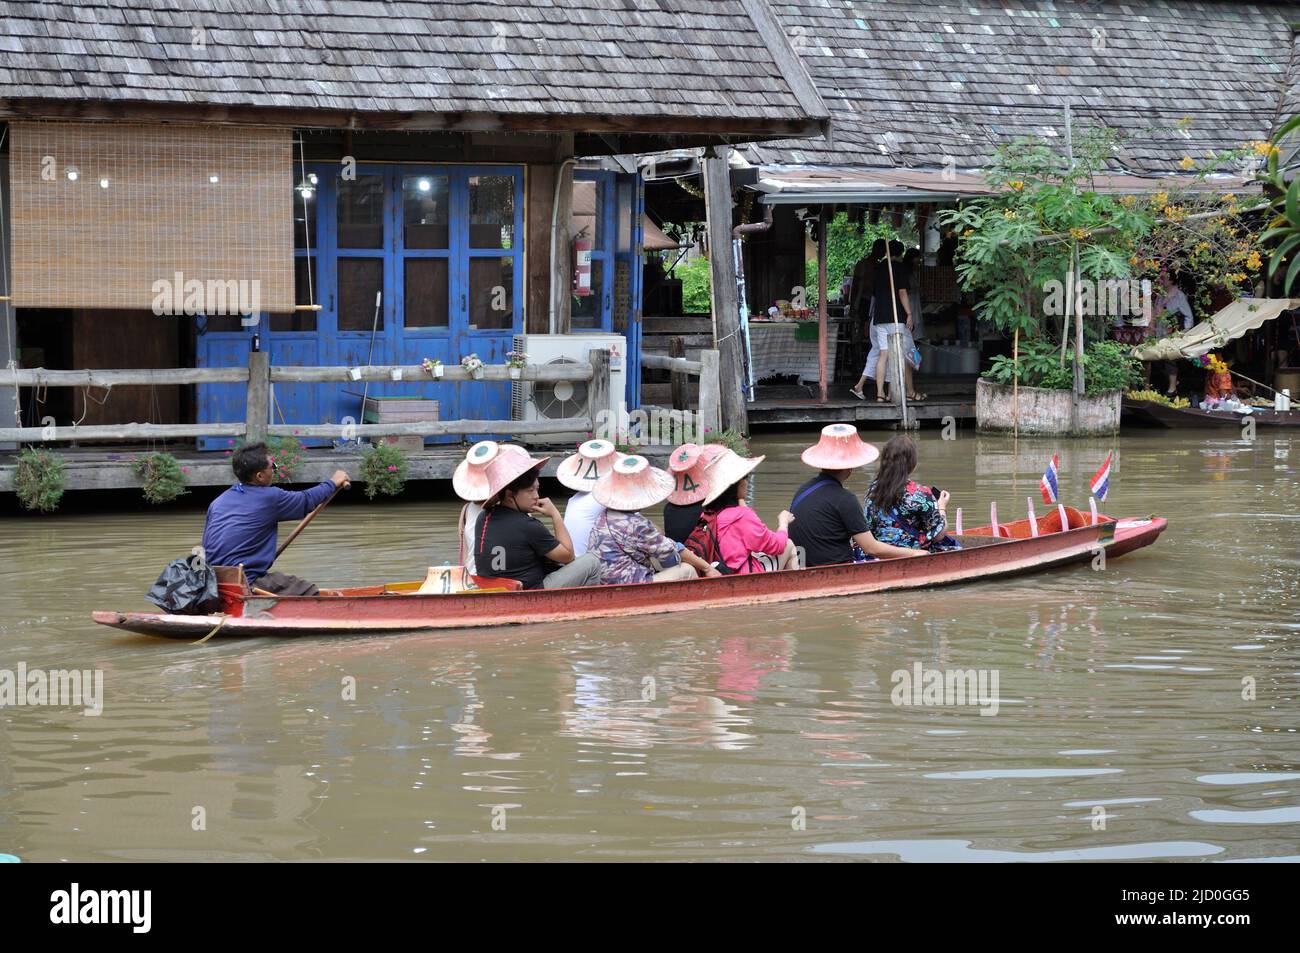 Tourists in boat on the waters of the Floating Market - Pattaya, Thailand. Stock Photo